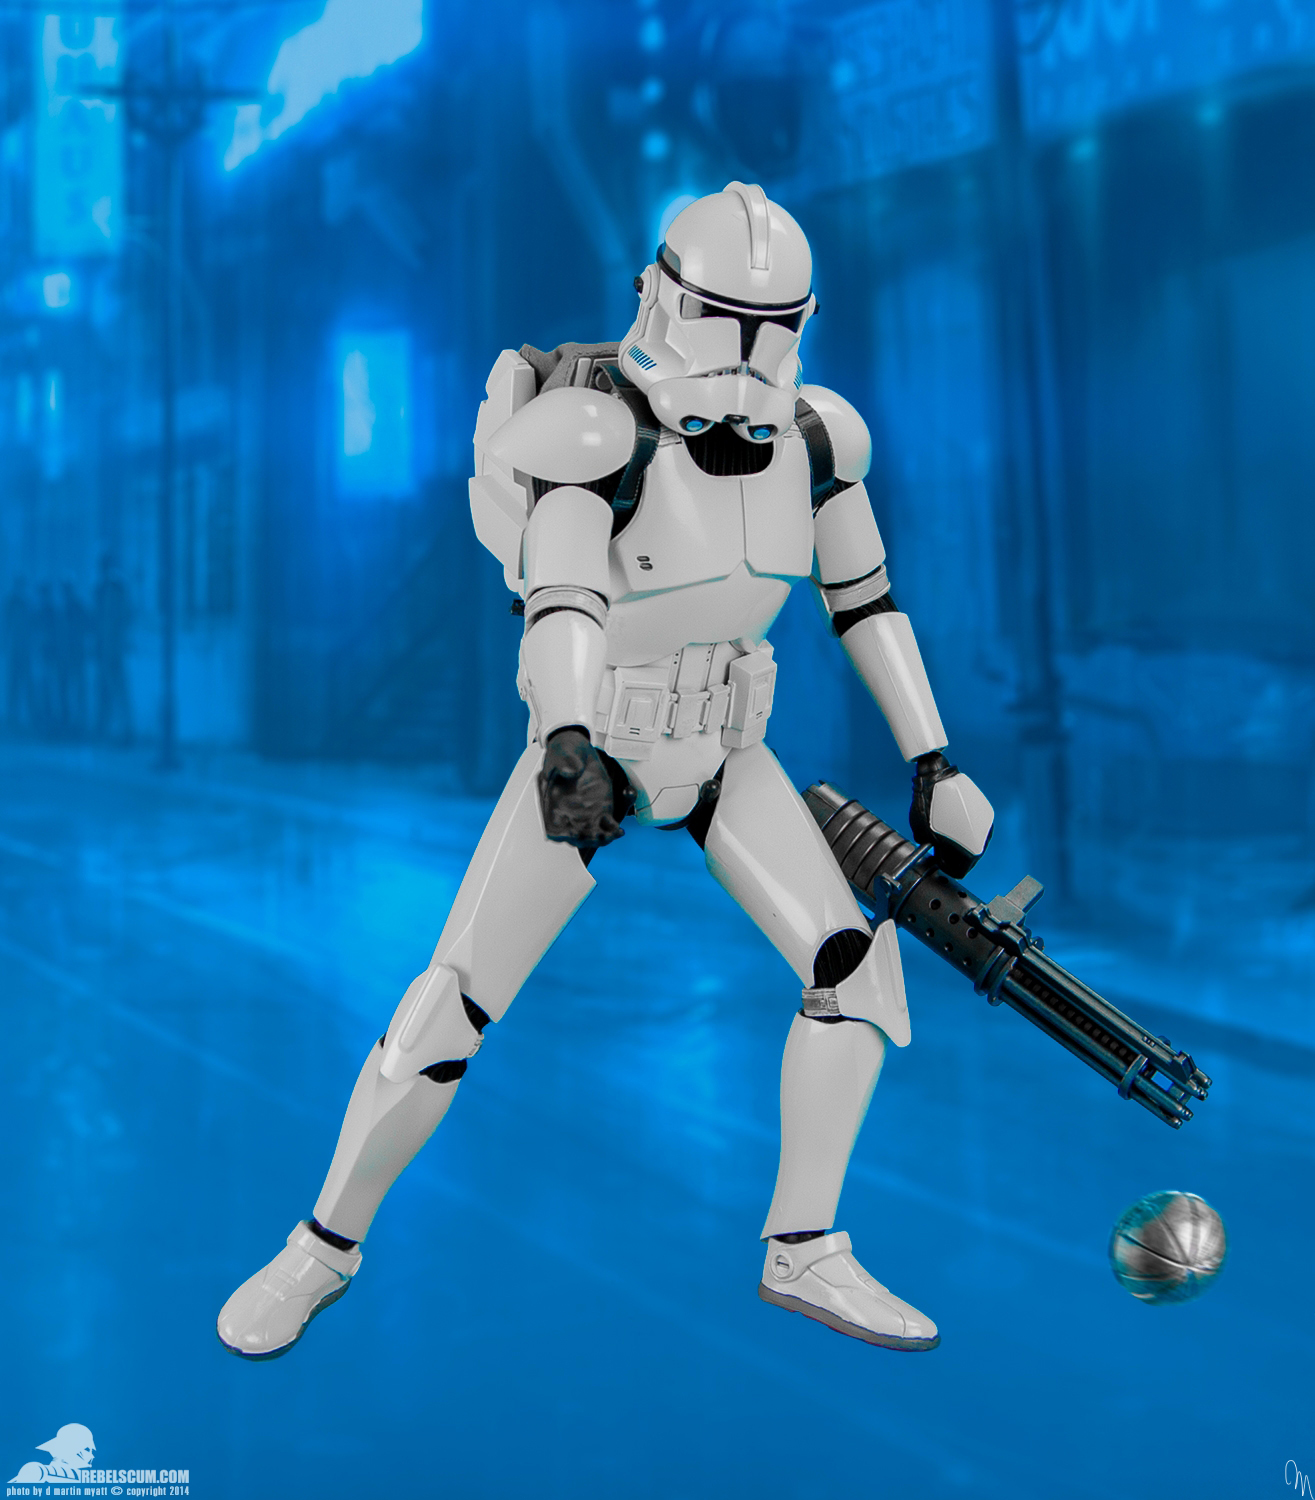 Shiny-Clone-Trooper-Deluxe-Sixth-Scale-Figure-Sideshow-019.jpg